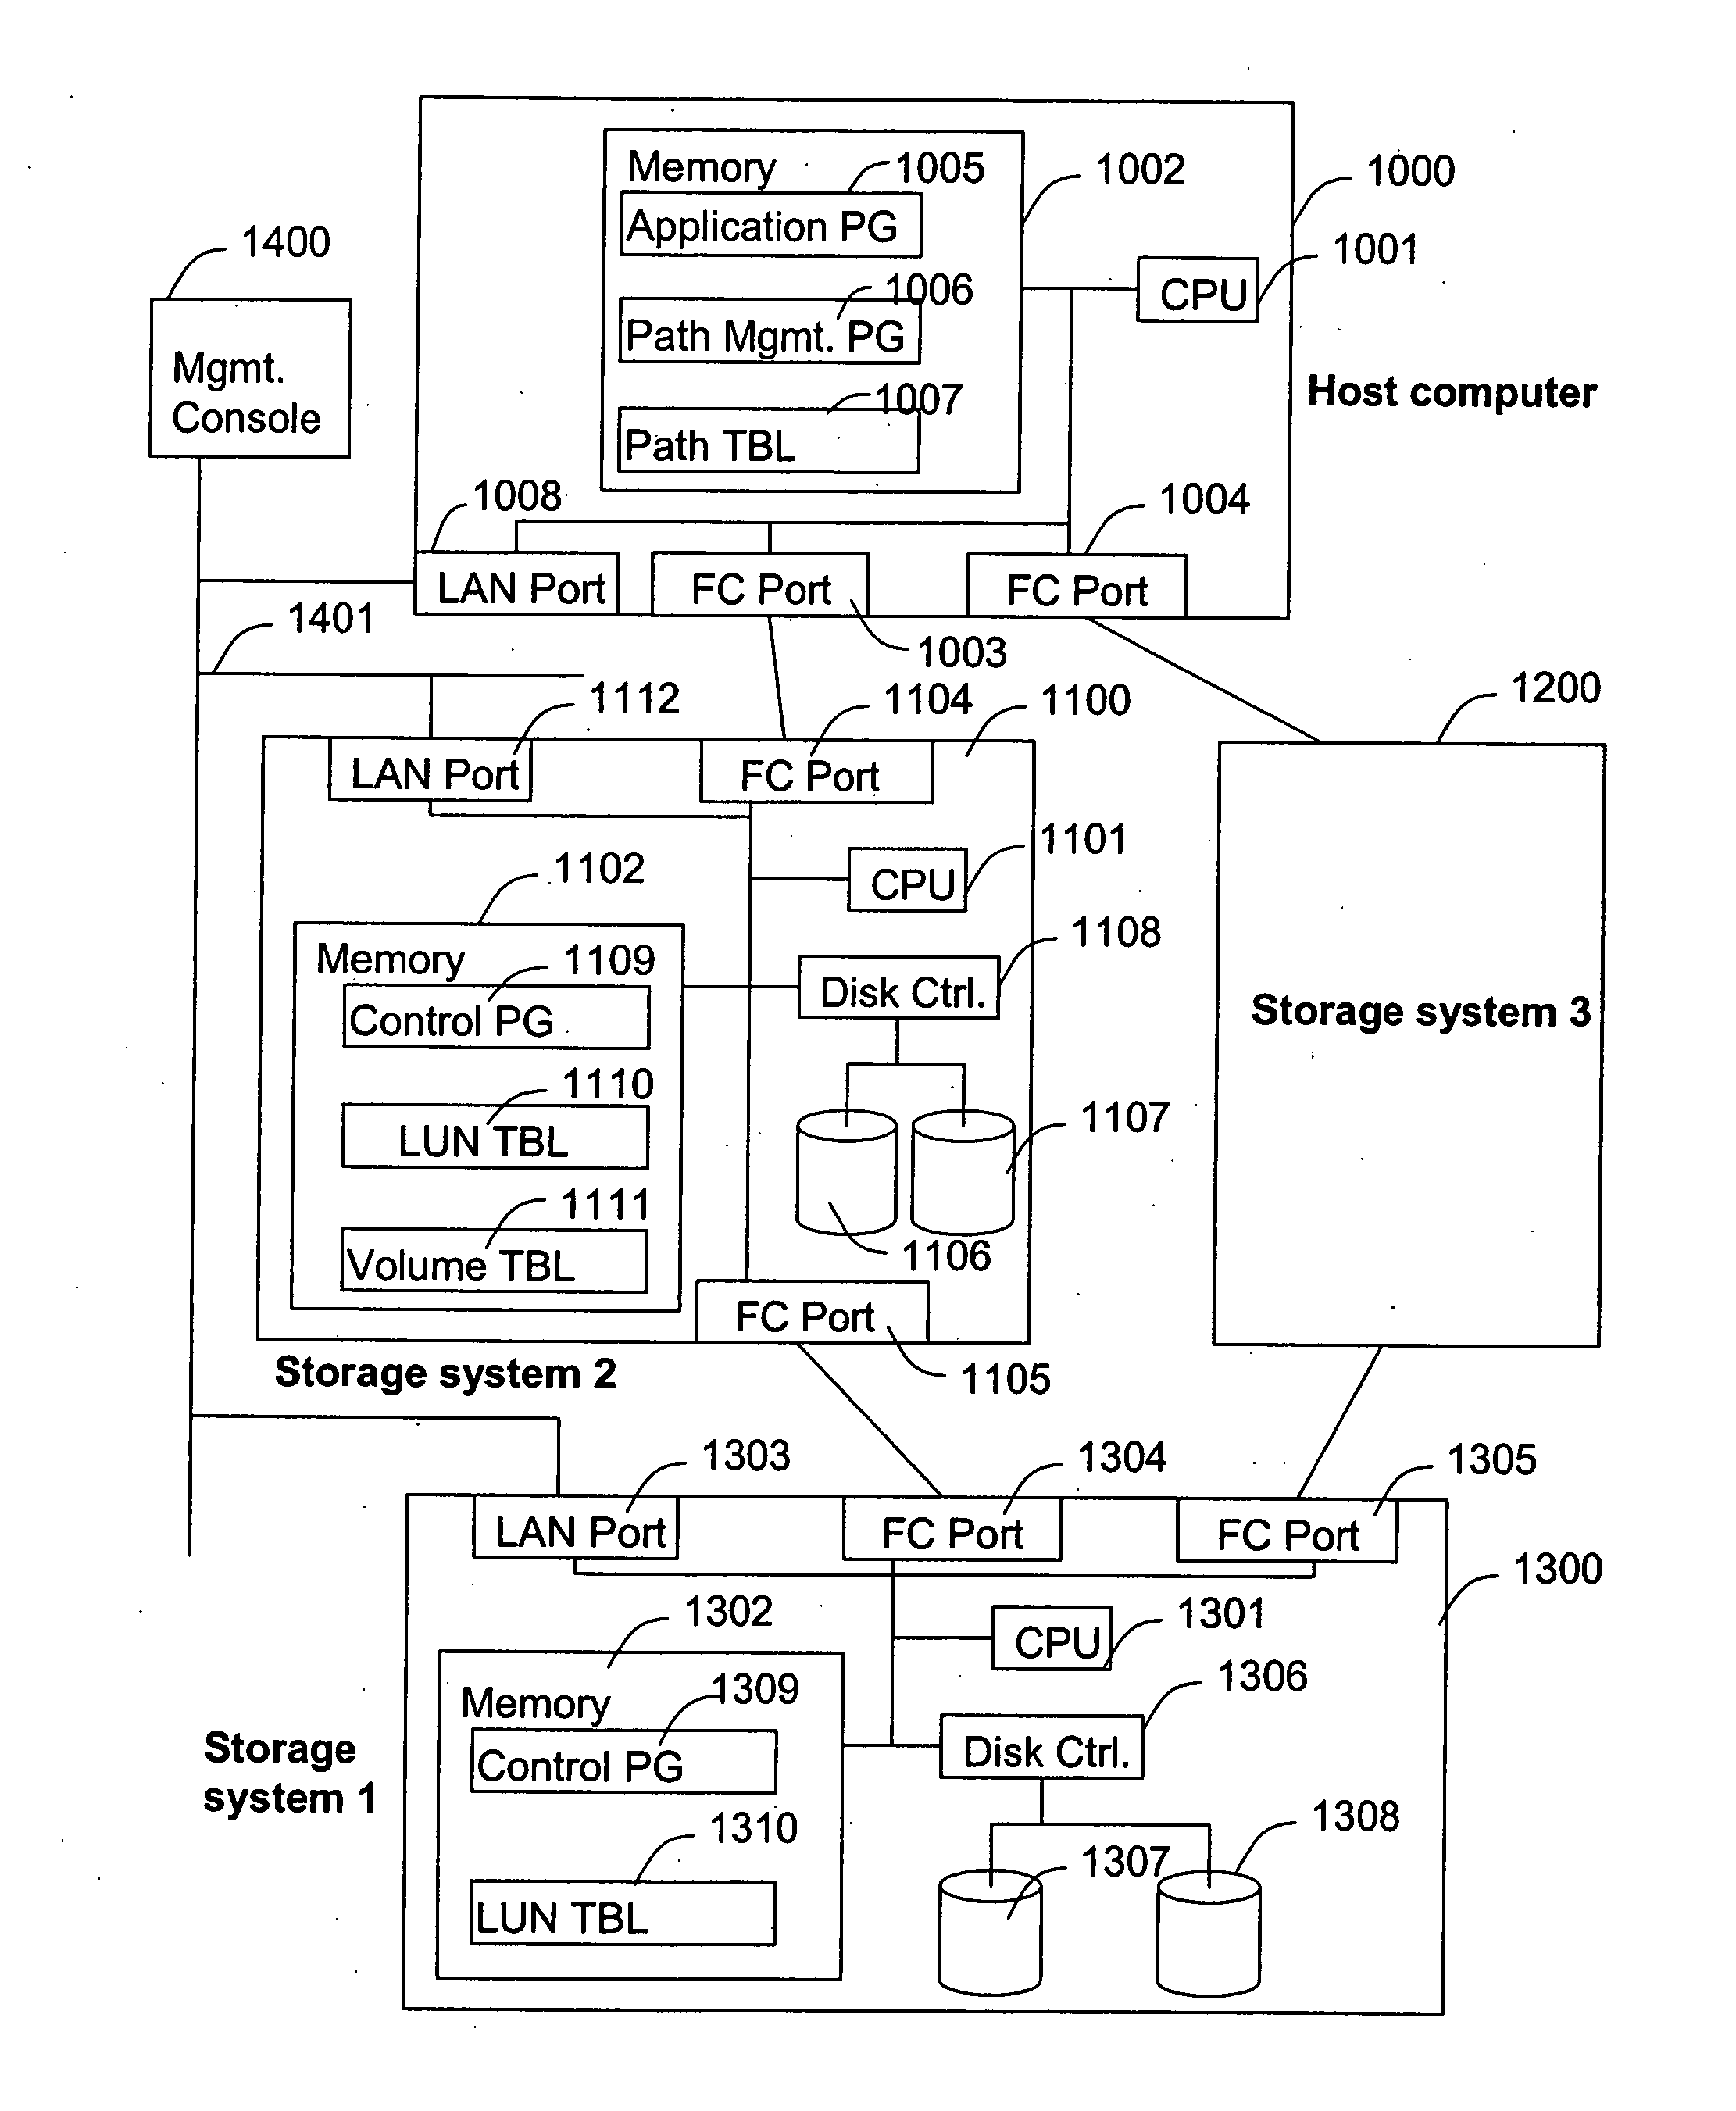 Clustered storage system with external storage systems